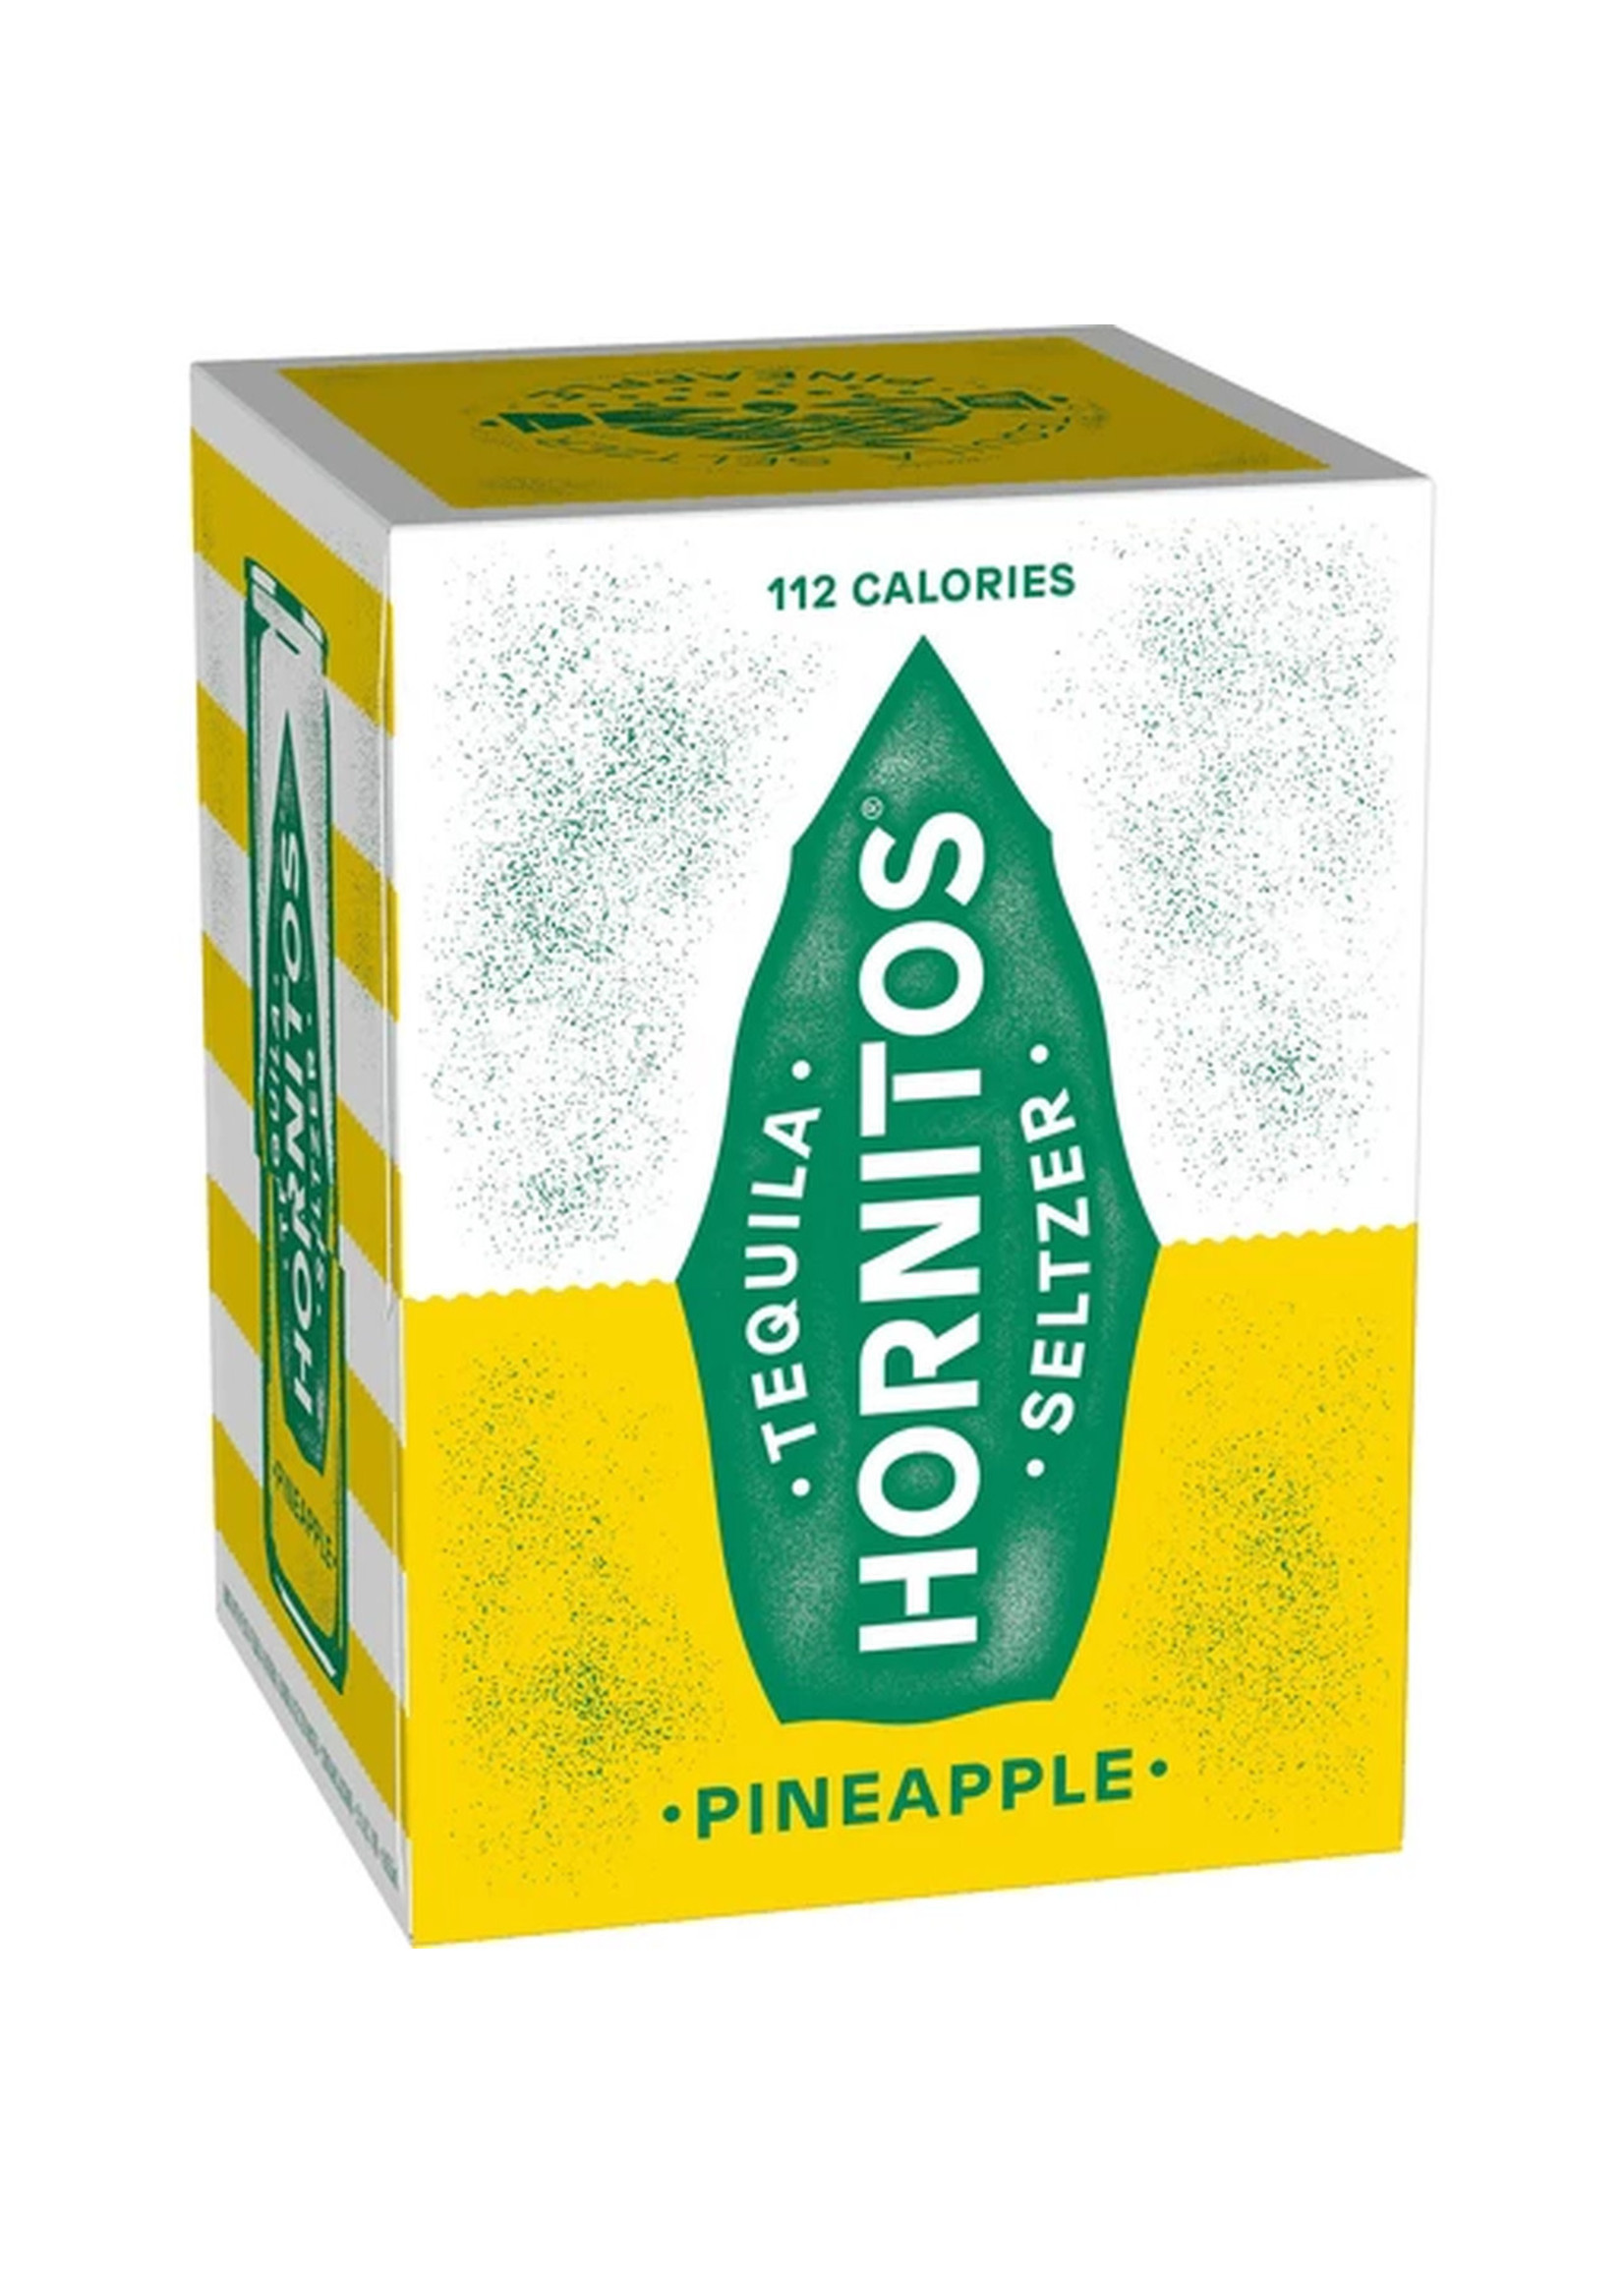 Hornitos Tequila Hornitos RTD Pineapple Flavored Tequila Seltzer 10Proof 4pk 12oz Cans